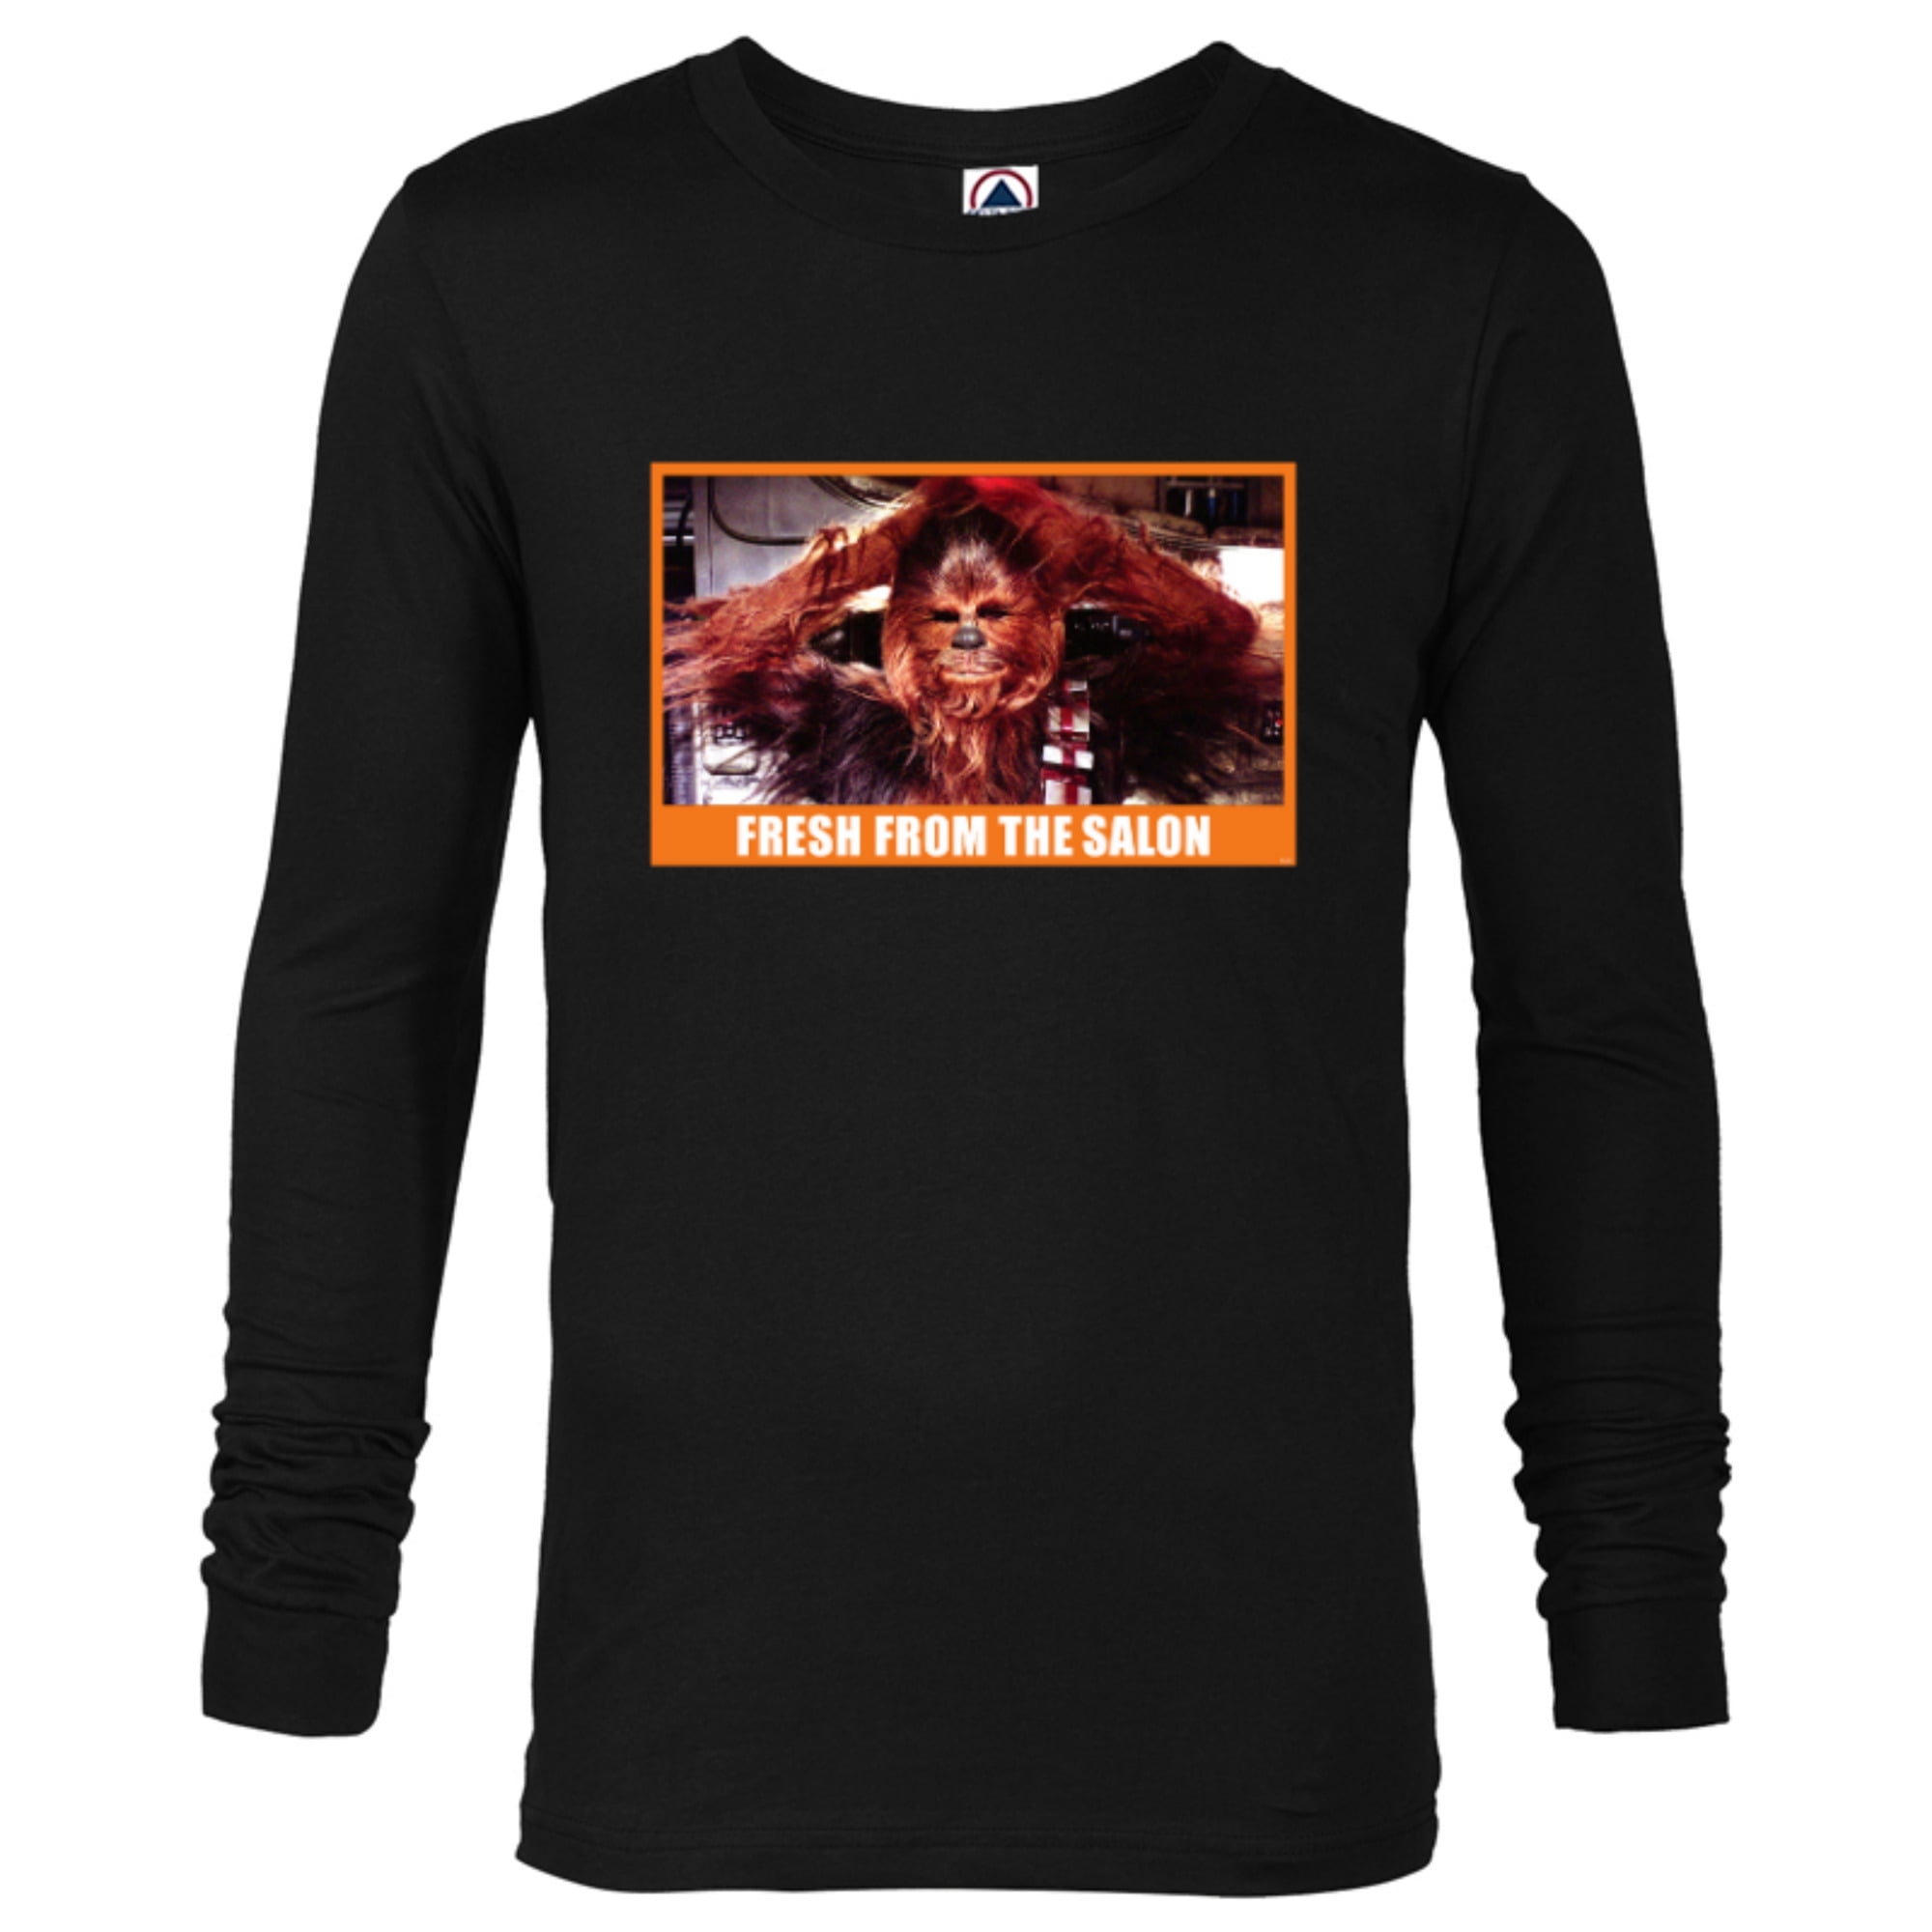 from the T- - Fresh Long Meme for Wars Sleeve Men Star Wookiee Customized-Black Shirt Salon Funny - Chewbacca